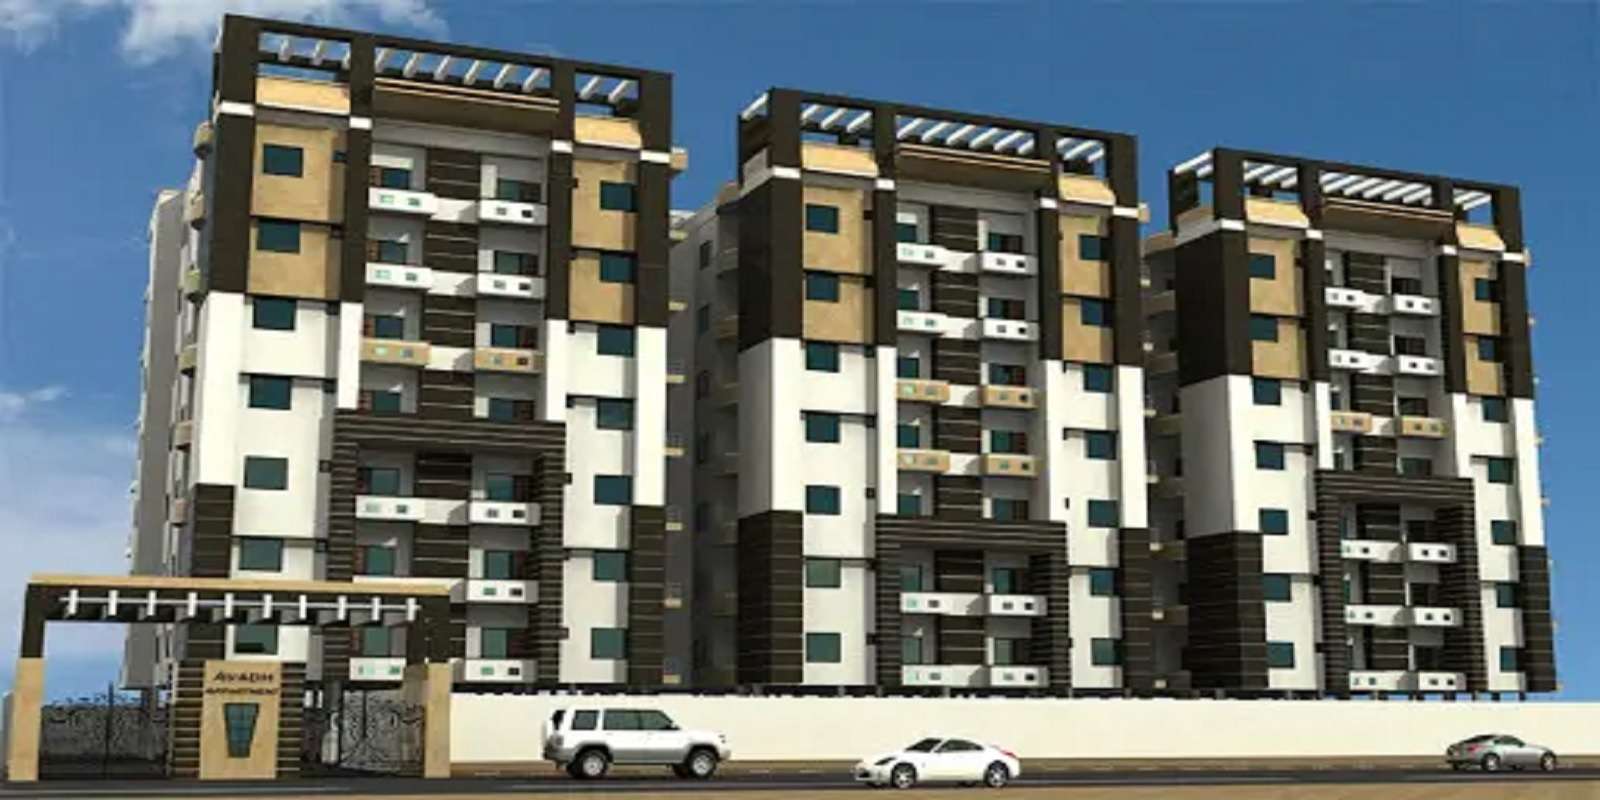 Awadh Apartment Cover Image